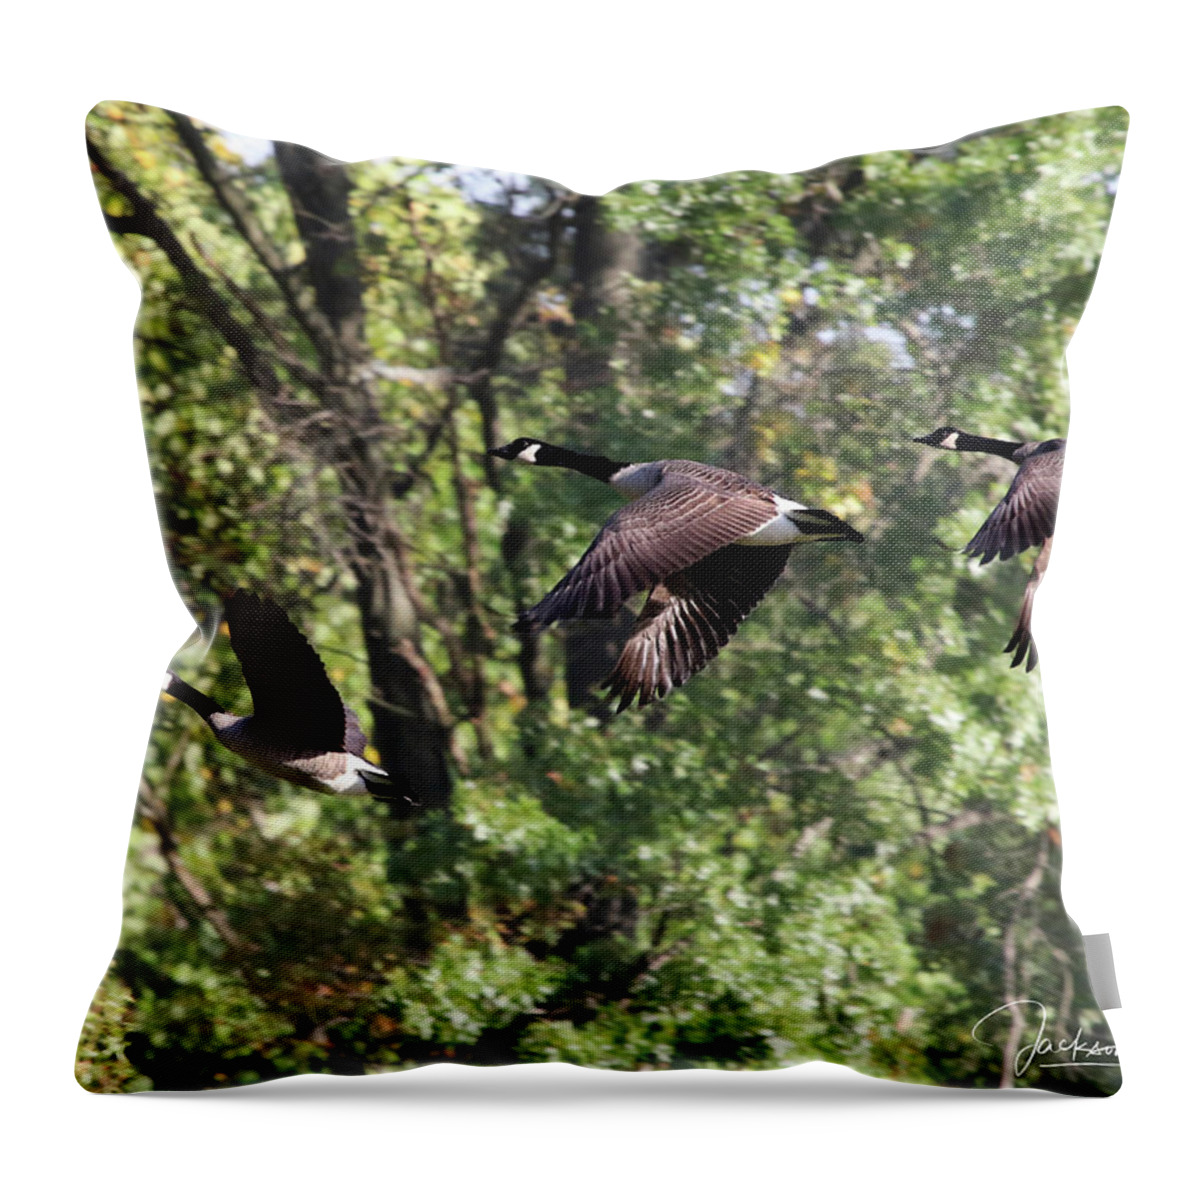 Geese Throw Pillow featuring the photograph Fly Away by Jackson Pearson